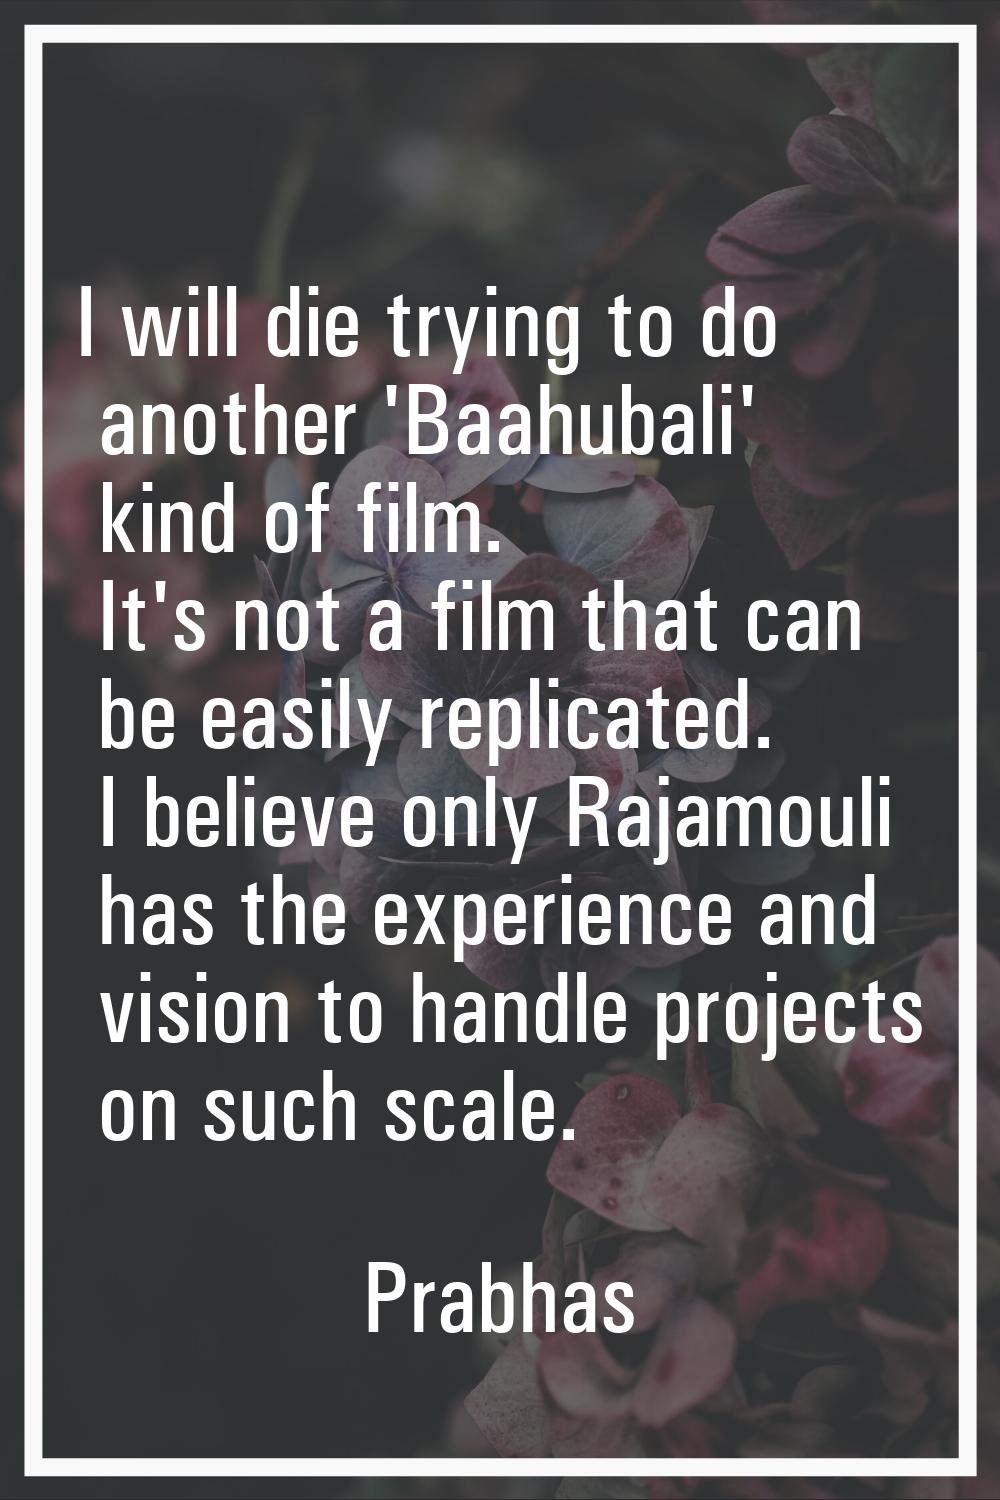 I will die trying to do another 'Baahubali' kind of film. It's not a film that can be easily replic